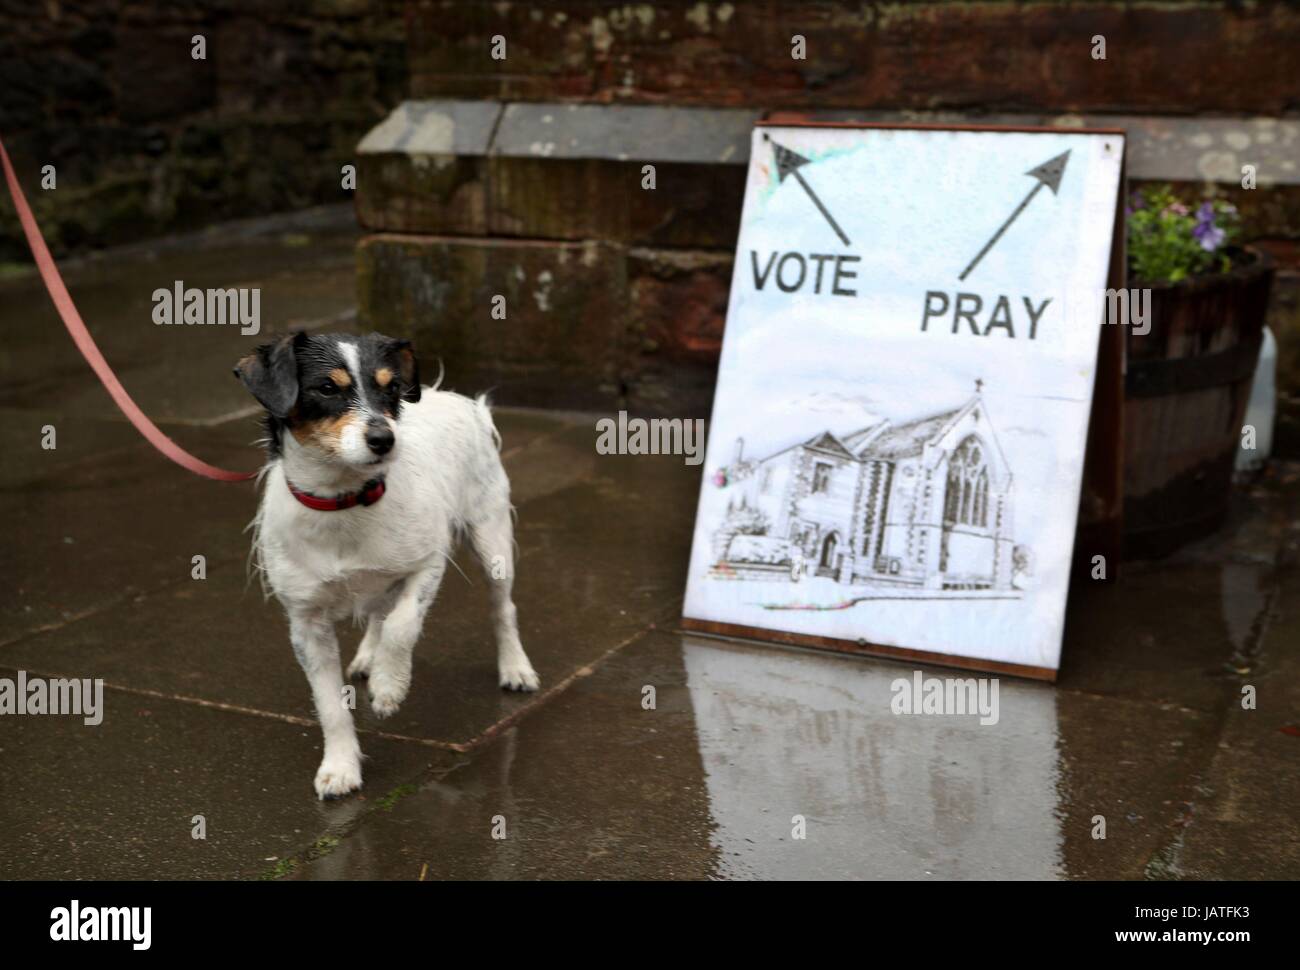 Skye the dog waits outside a polling station in St James' Church, Edinburgh as voters head to the polls across the UK to vote in the General Election. Stock Photo